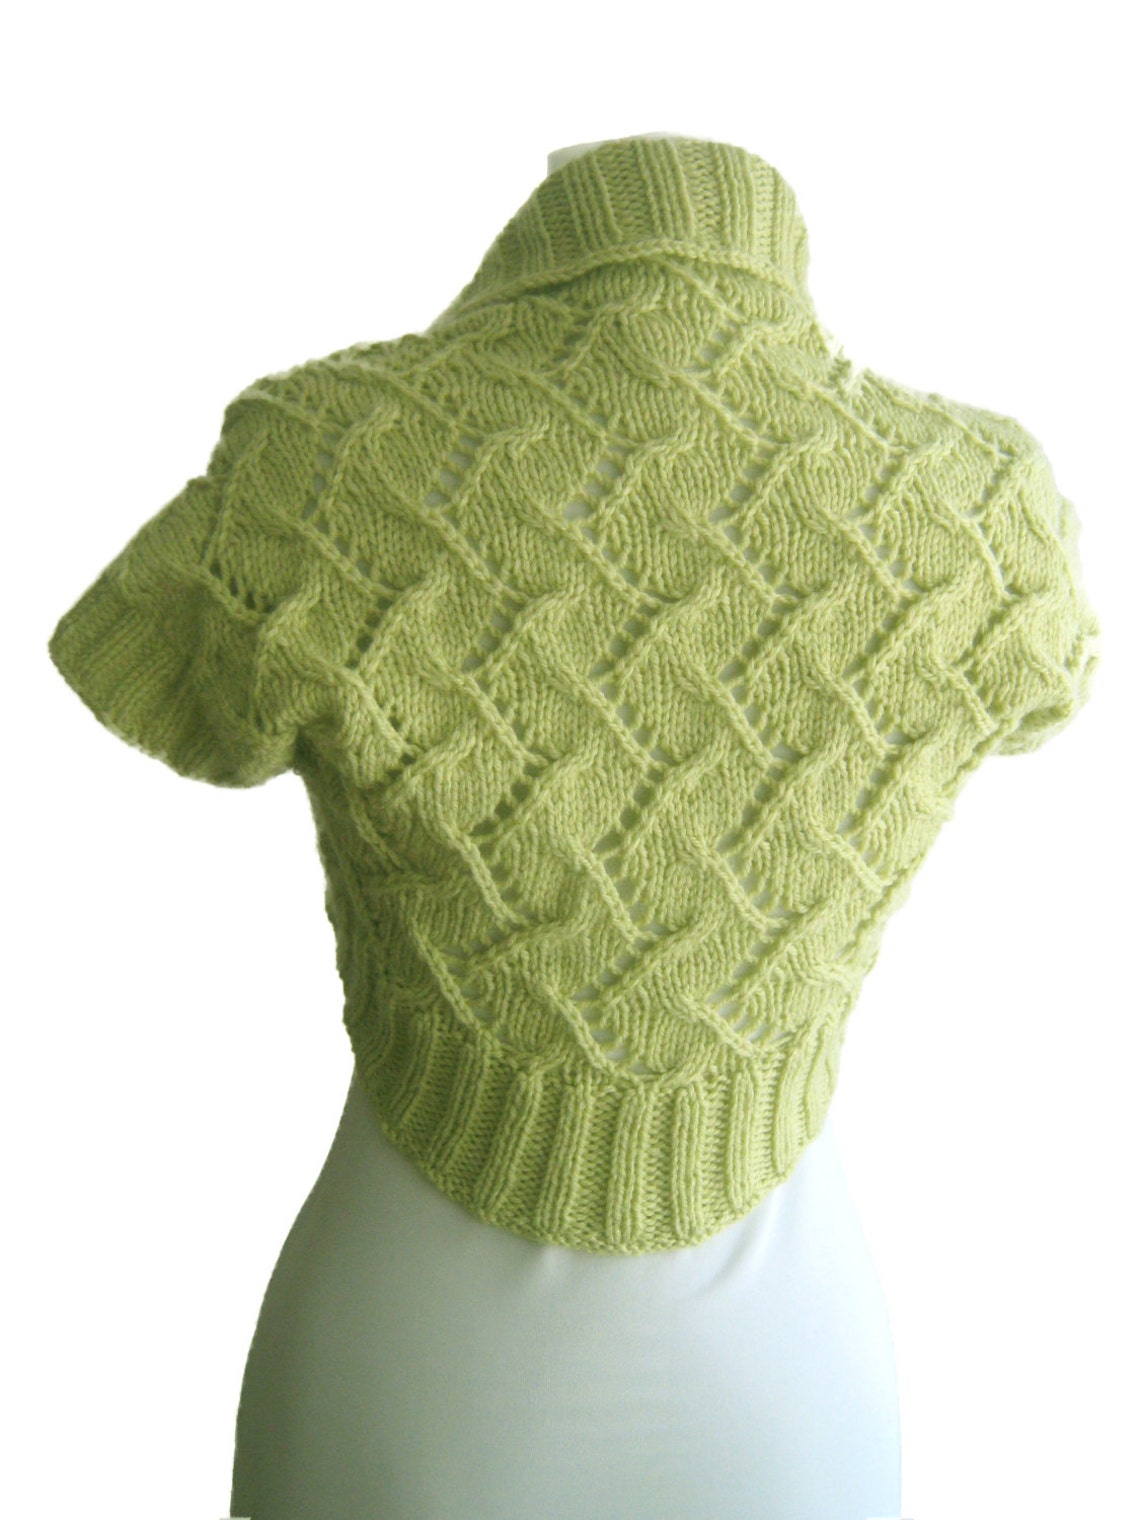 Buy Hand Knitted Shrug. Lime Green Shrug Knitted by Hand. Bright Online ...